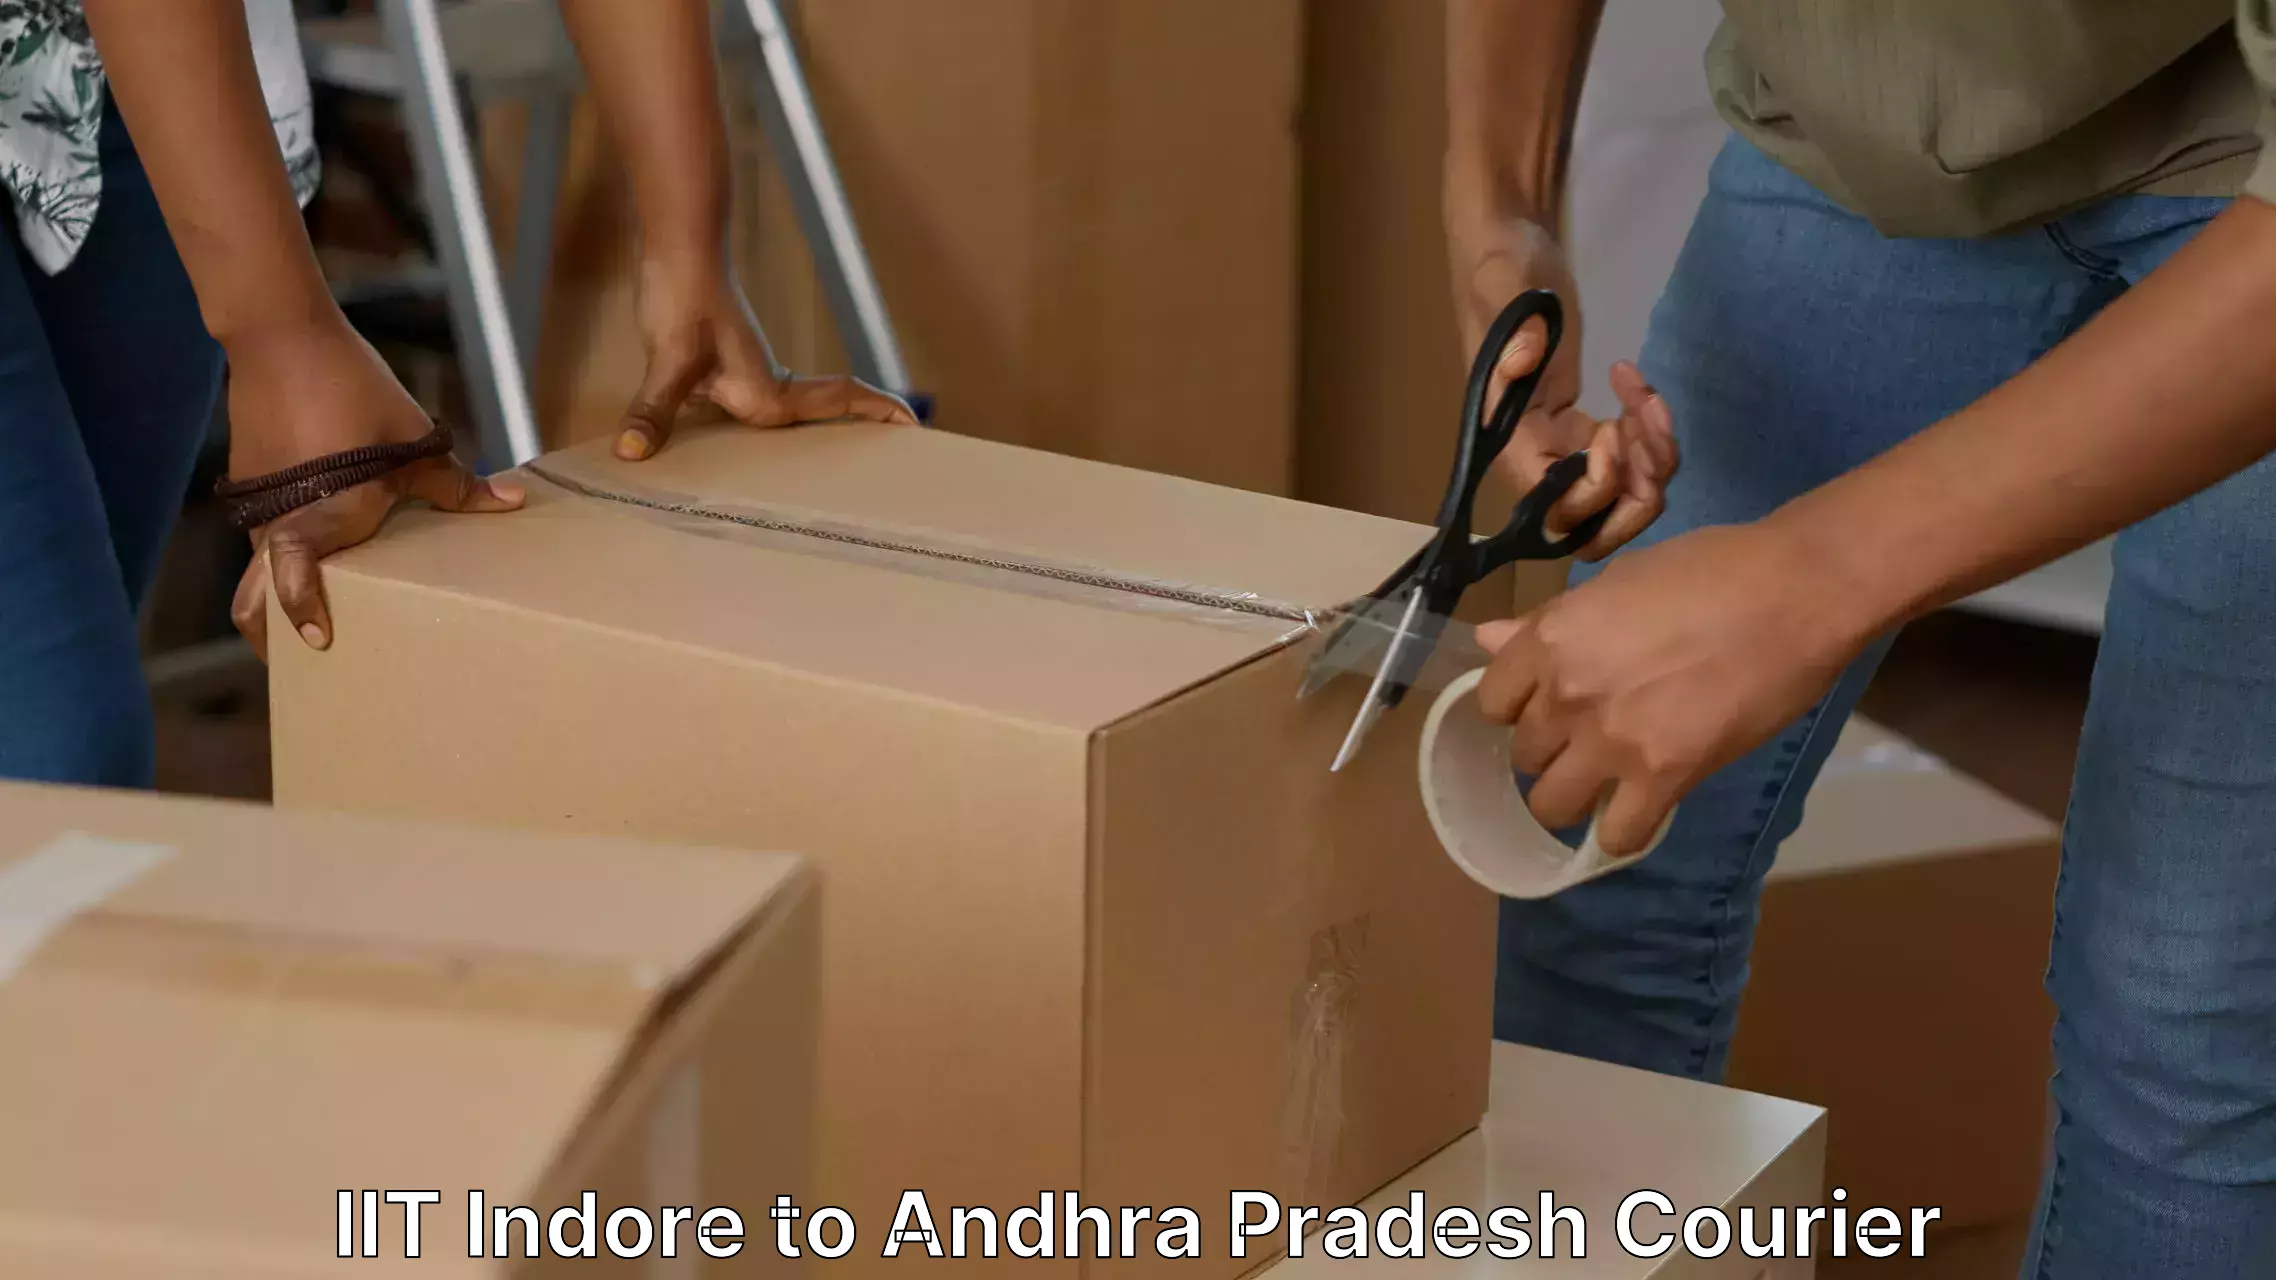 Furniture transport solutions IIT Indore to Andhra Pradesh